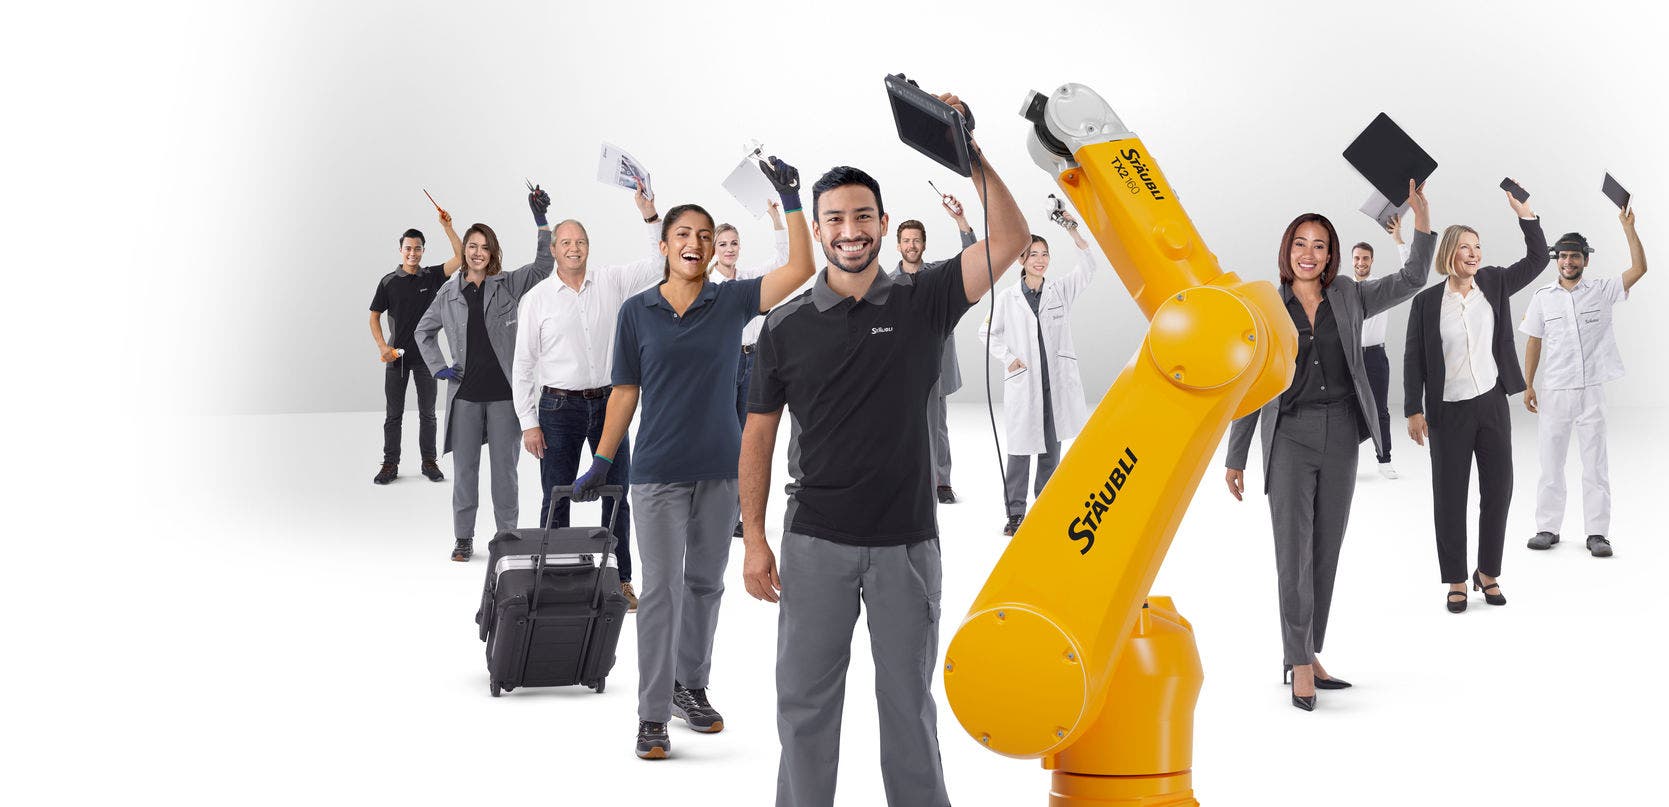 Beyond robots, a complete team including maintenance technicians, hotline, certified instructors, application and programming experts.